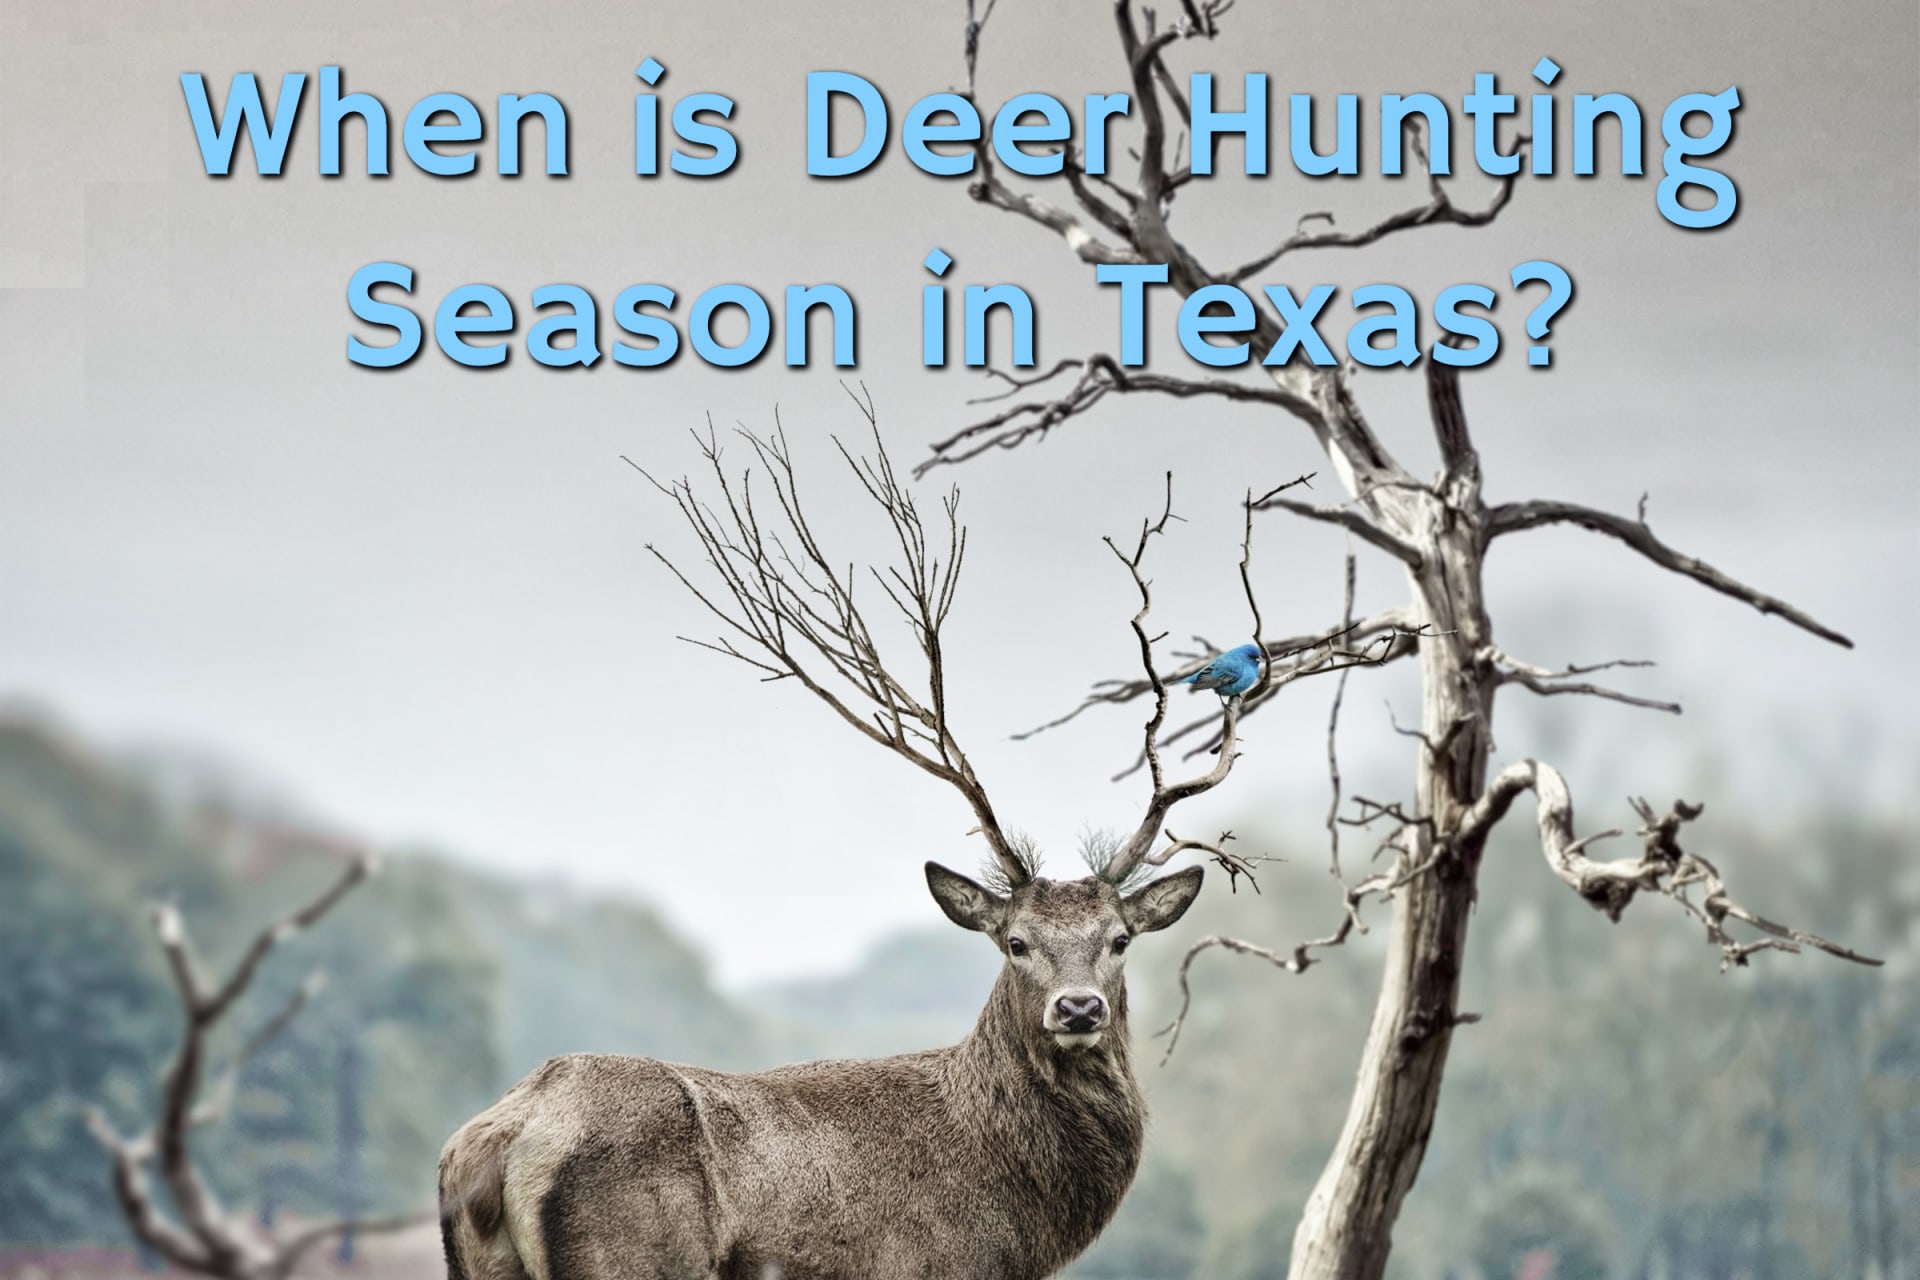 A lone deer standing next to a tree in winter, waiting for deer hunting season in Texas